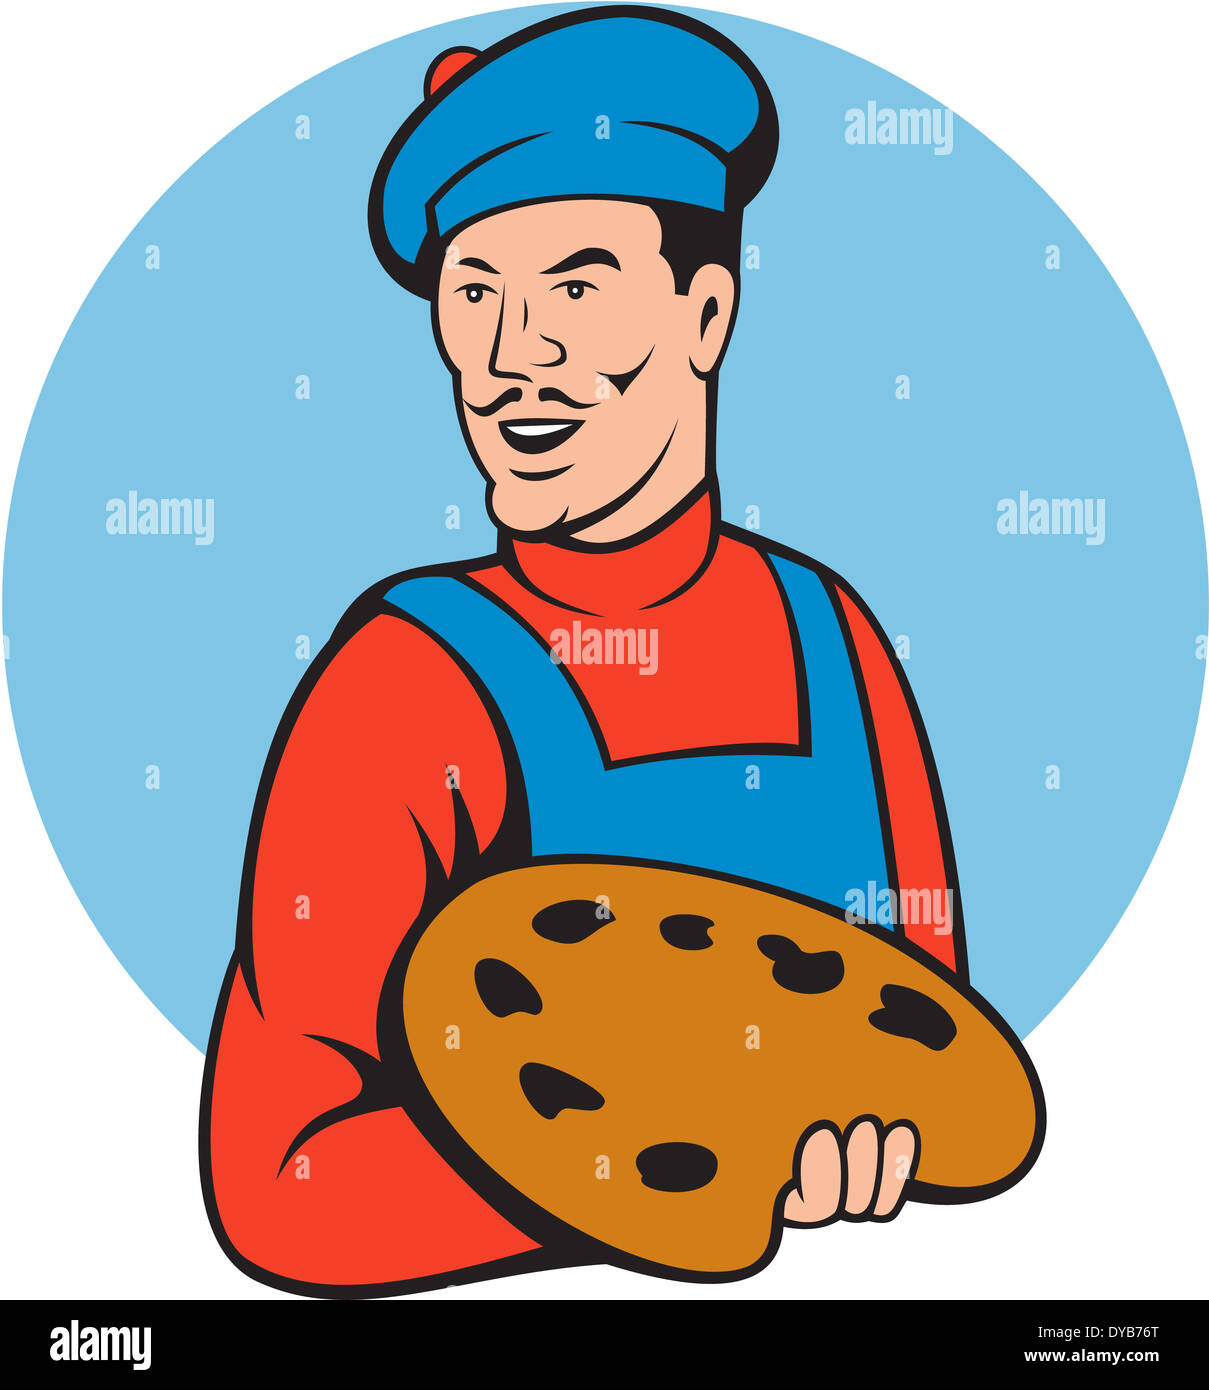 illustration of a fine artist painter wearing beret holding paint palette set inside circle on isolated background done in cartoon style. Stock Photo